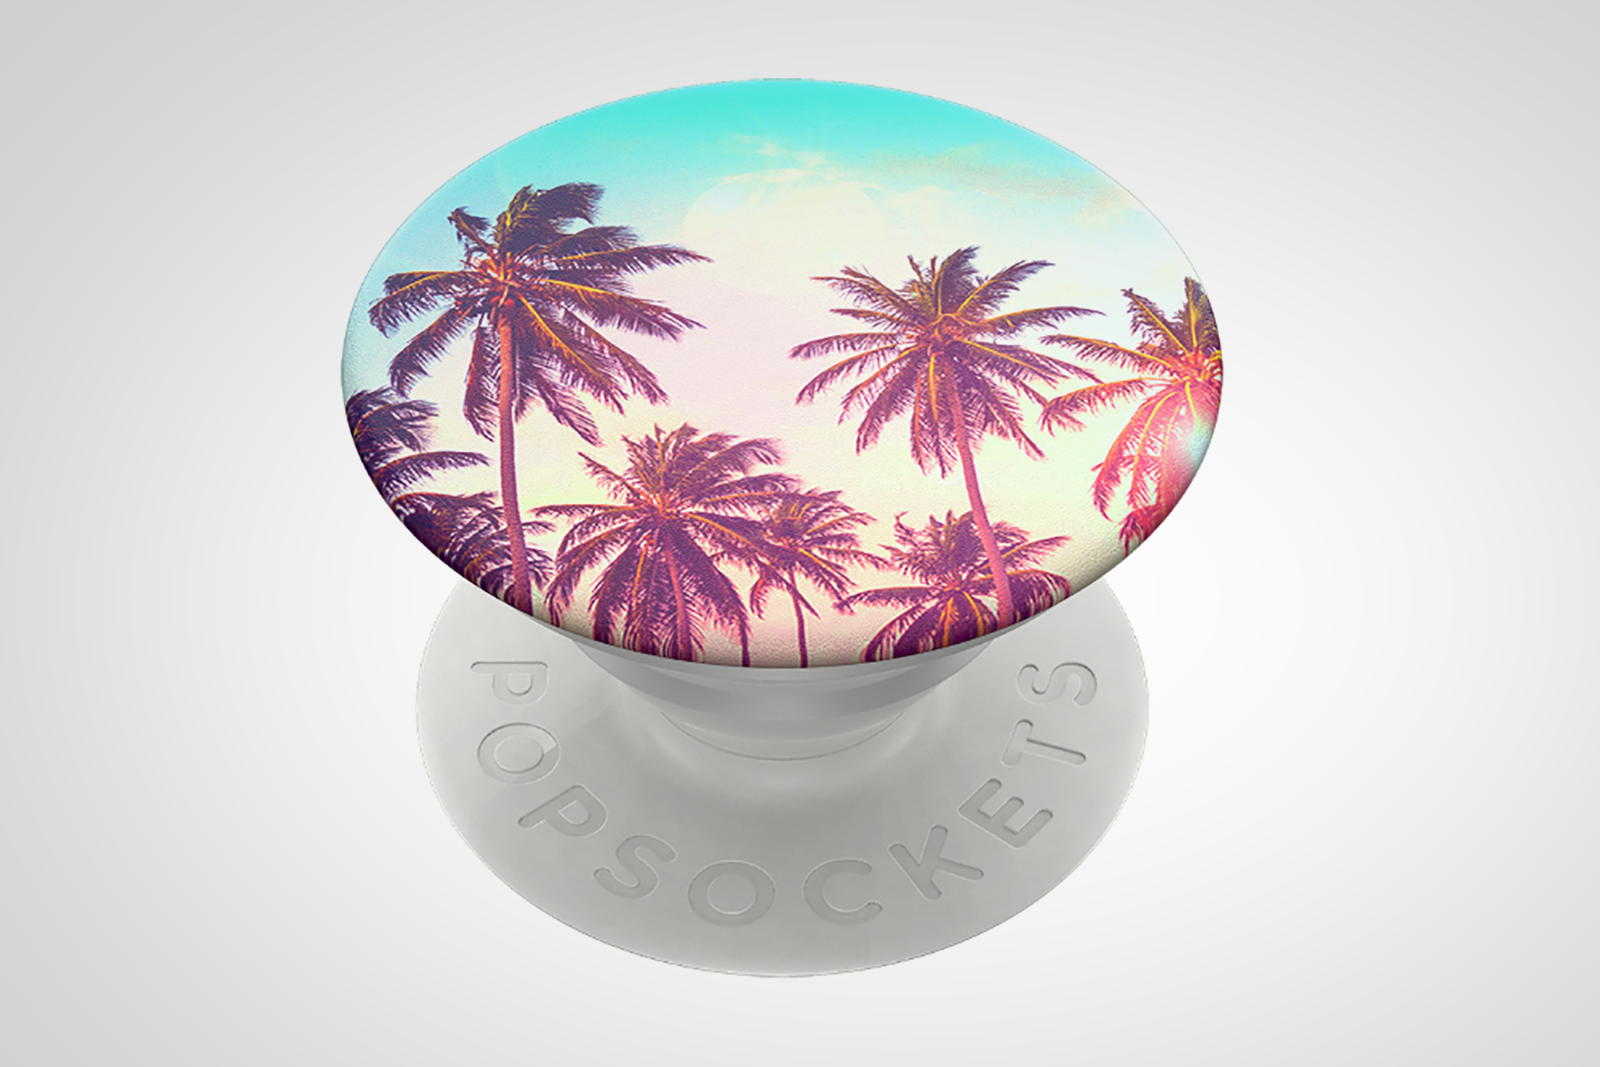 Best PopSocket designs 2020 Get a grip on your device with these cool patterns image 15